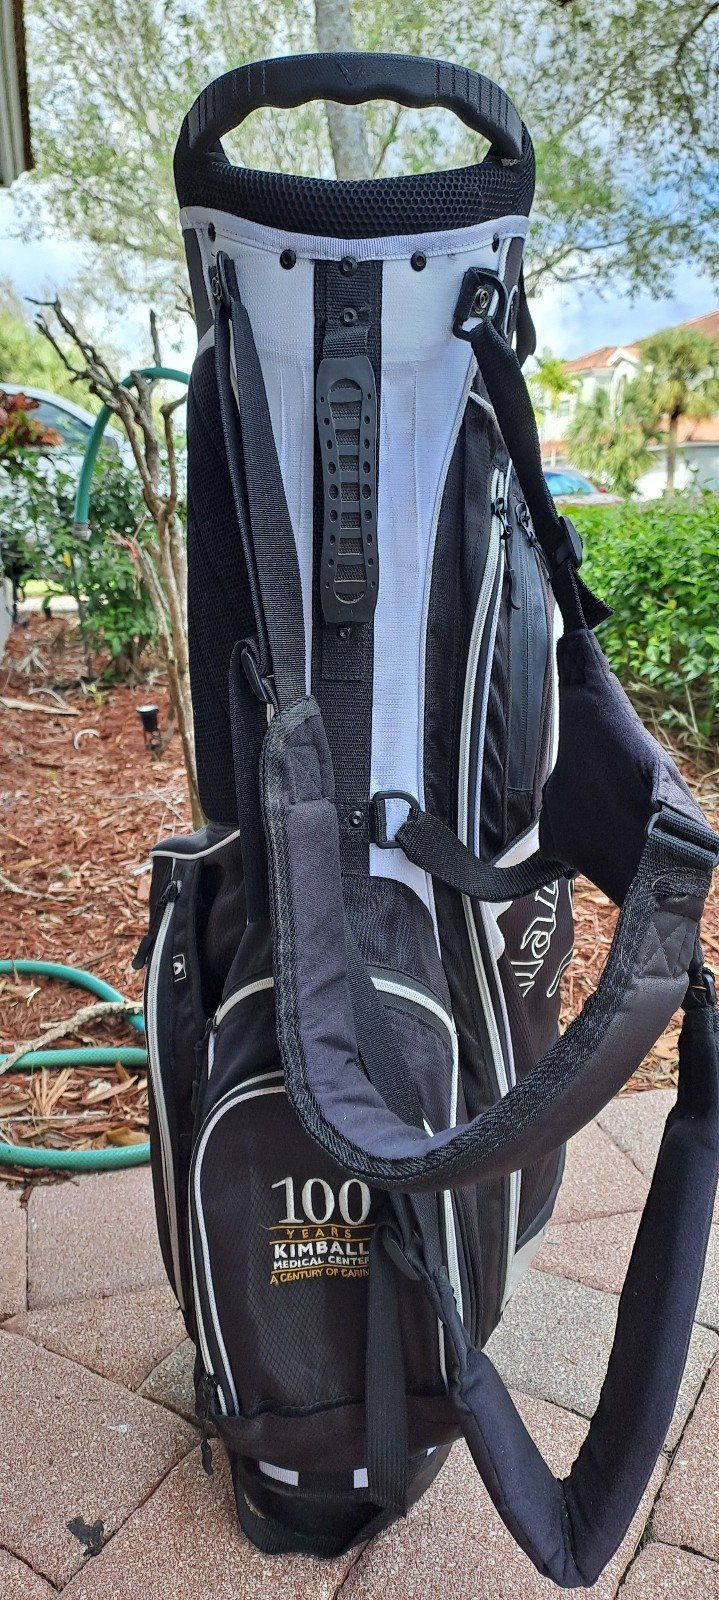 golf stand bag CALLAWAY 5 div black white shoulder strap all zip work perfectly 3I5rVYWXl